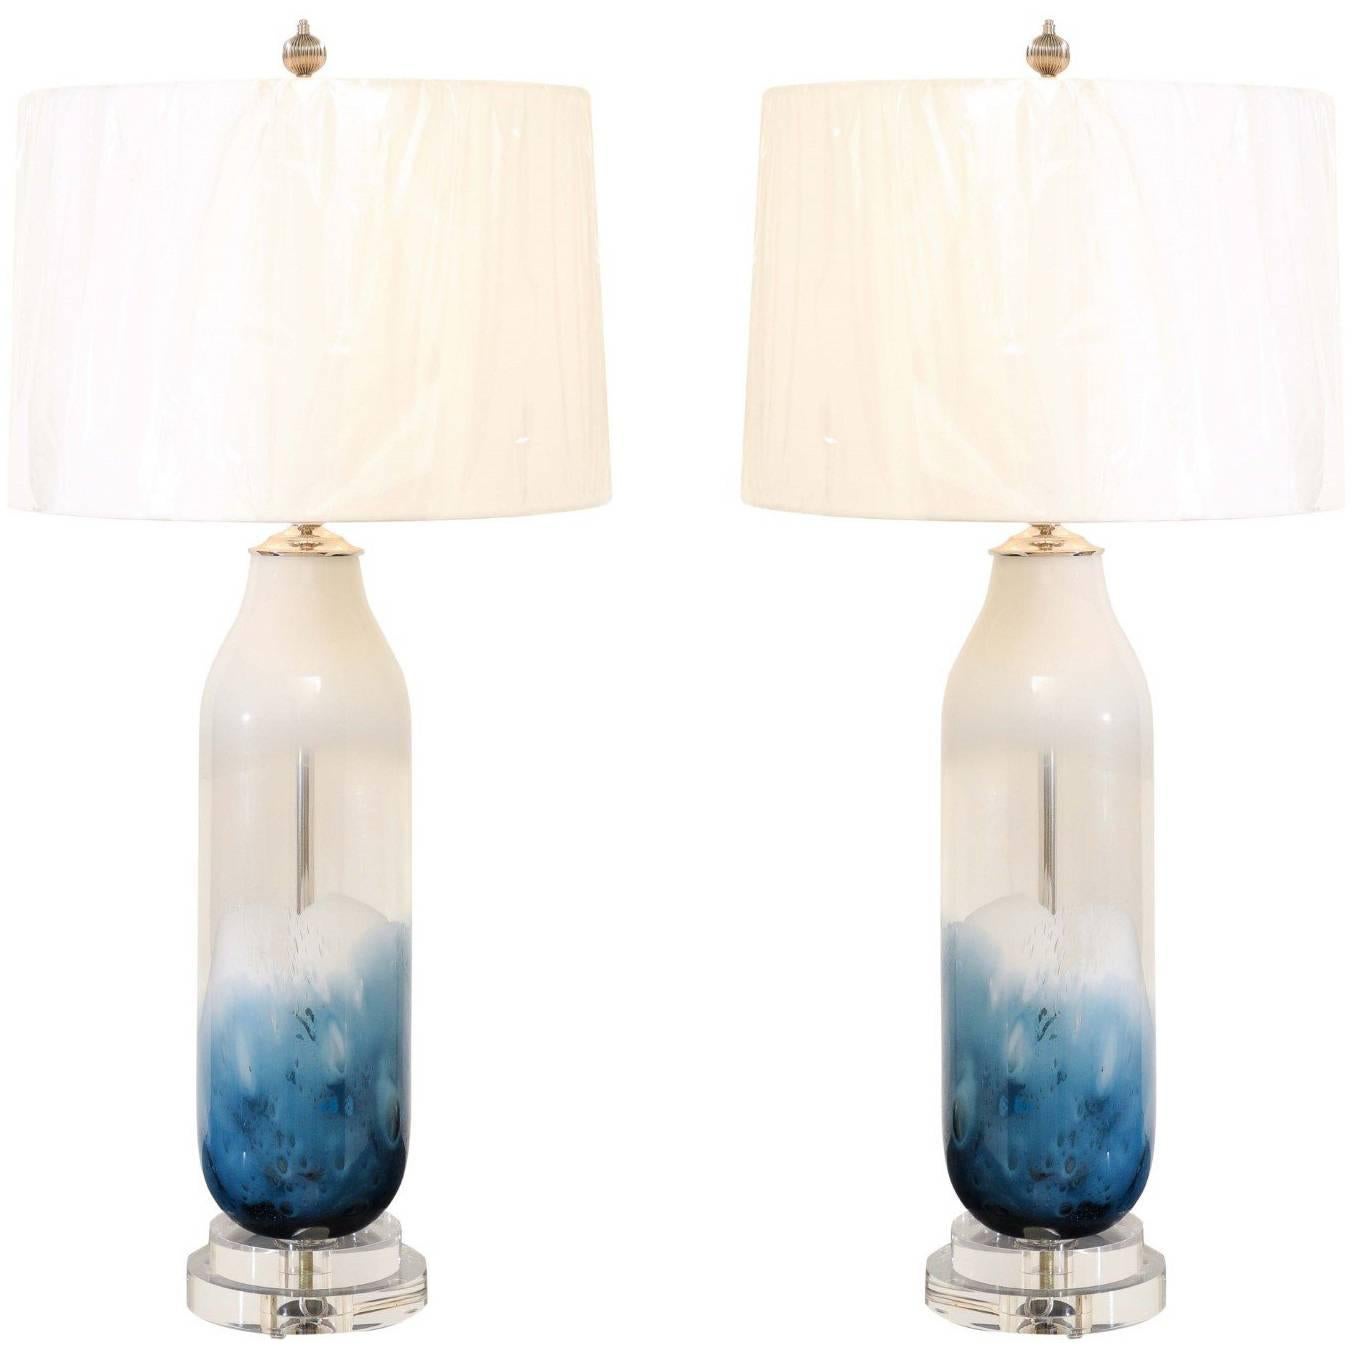 Staggering Pair of Blown Glass Italian Cloud Vessels as Custom Lamps For Sale